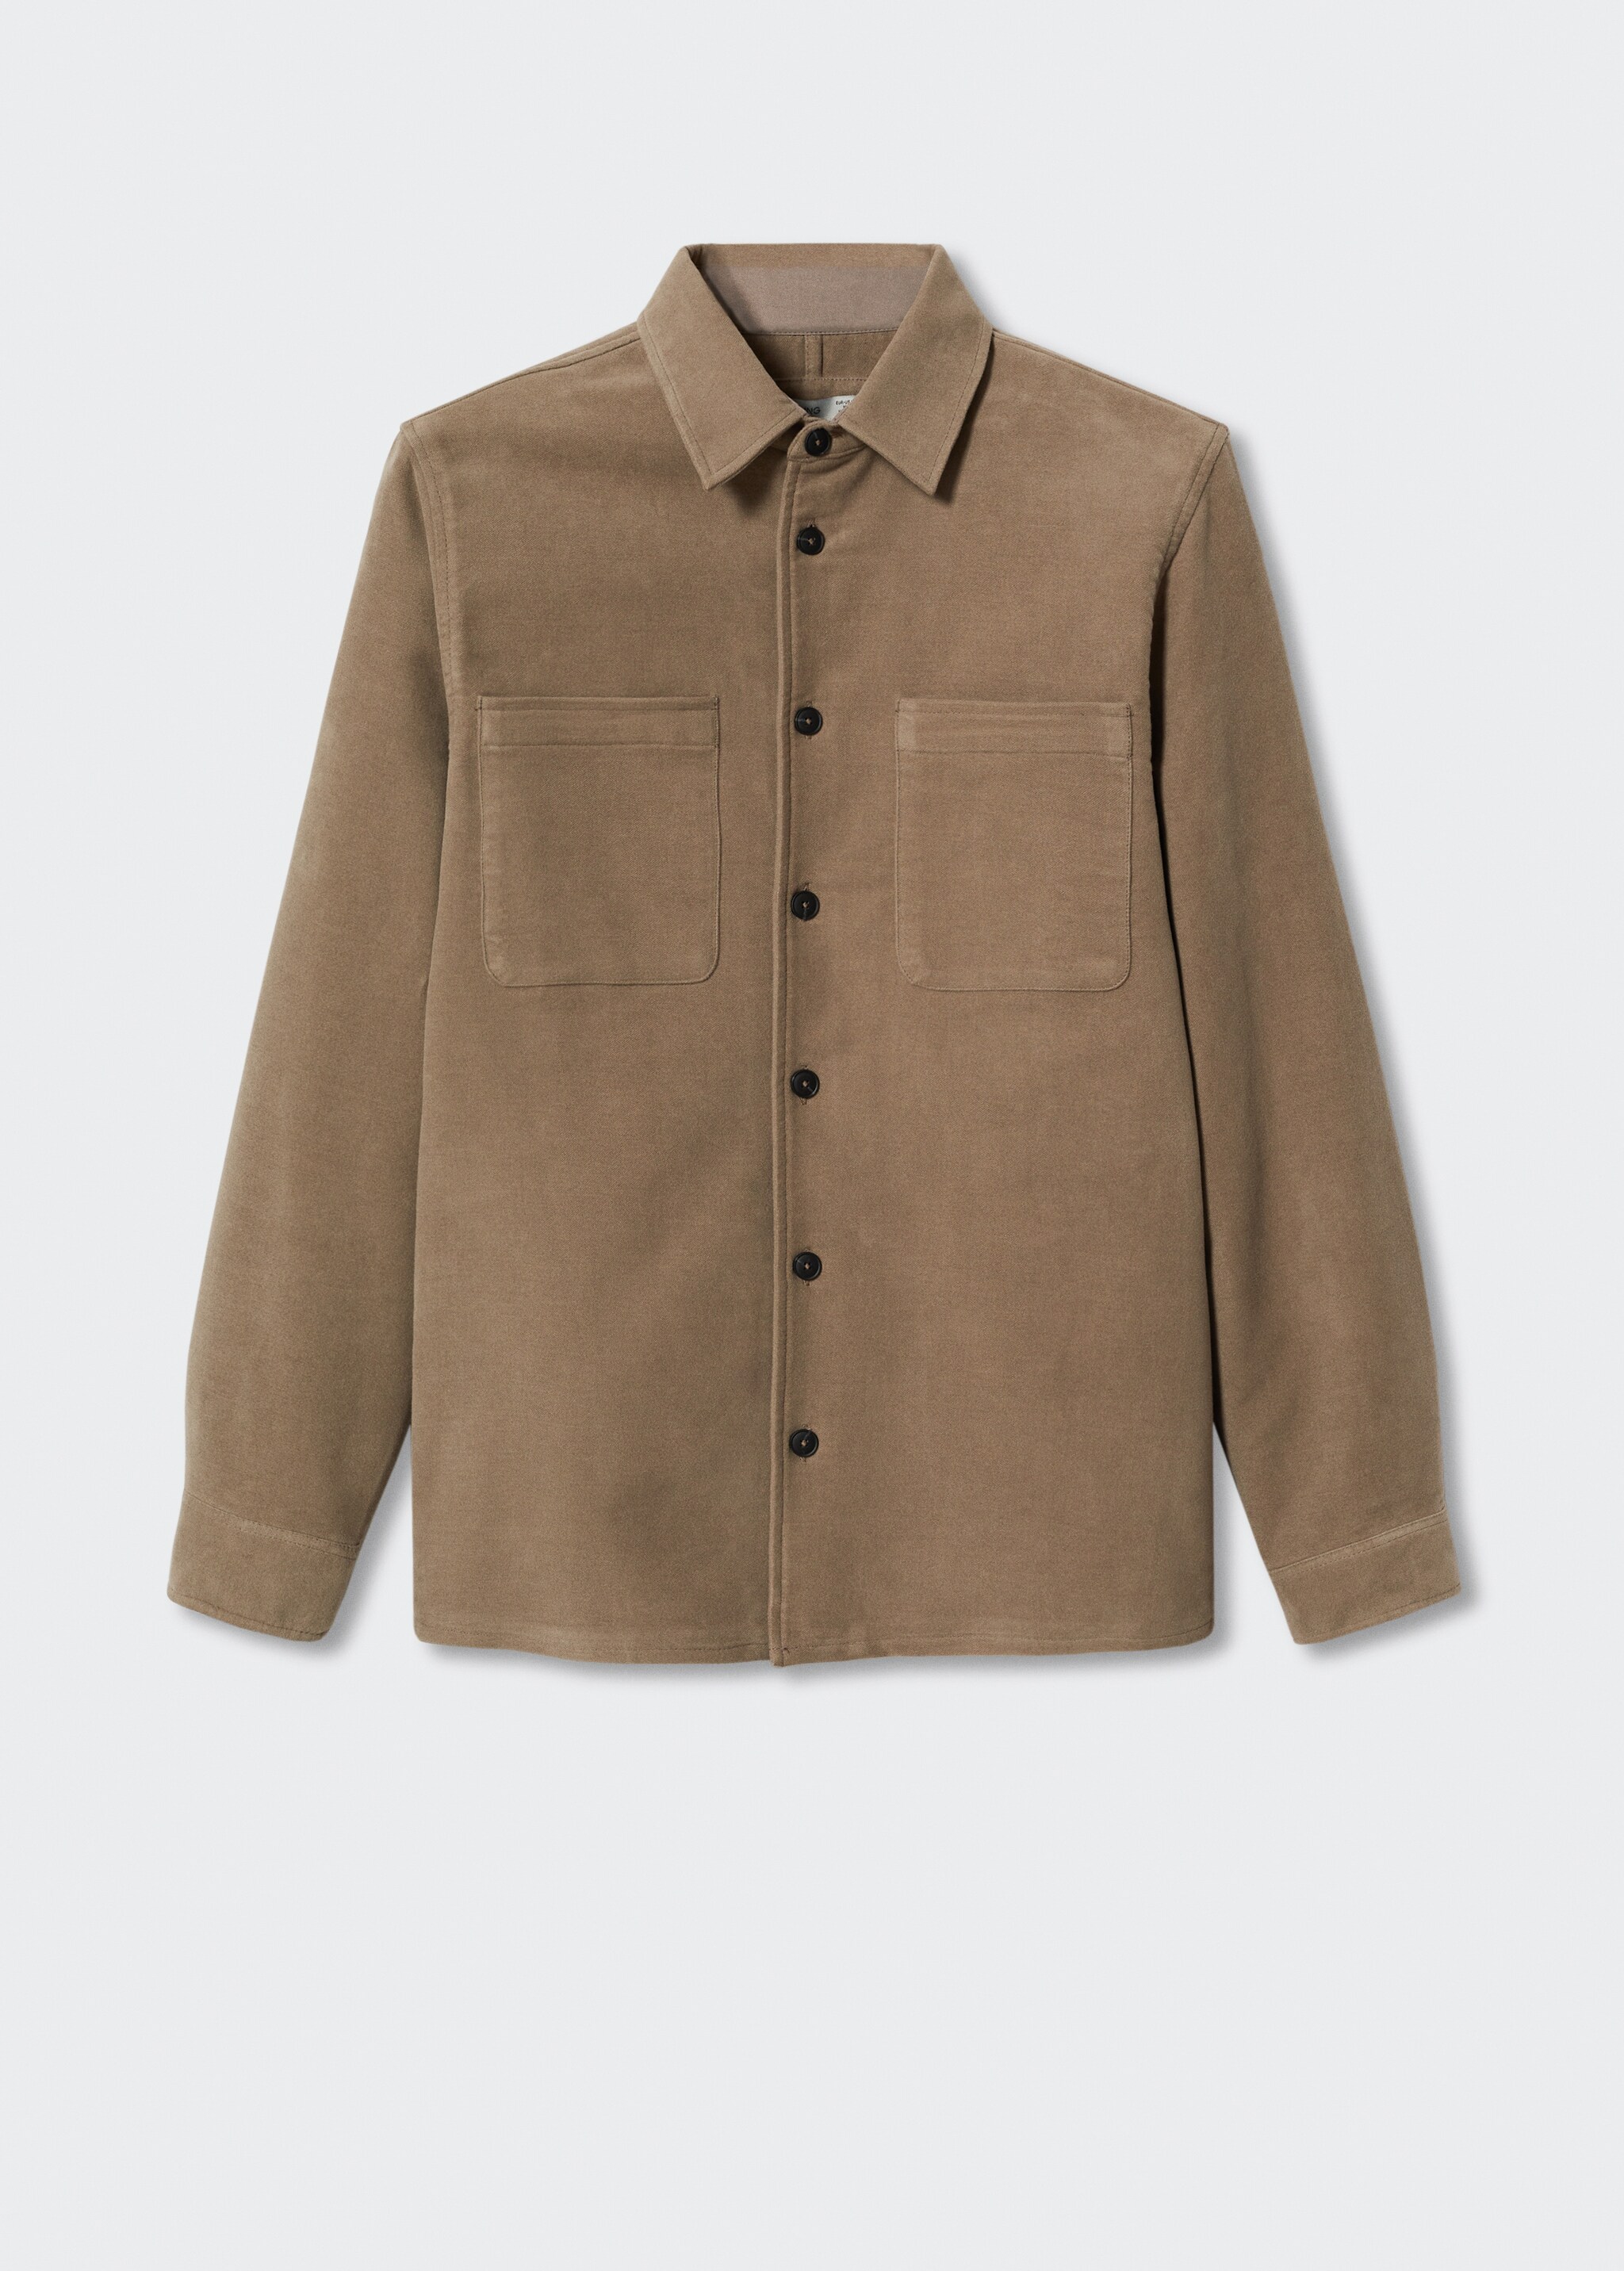 Textured overshirt with pockets - Article without model